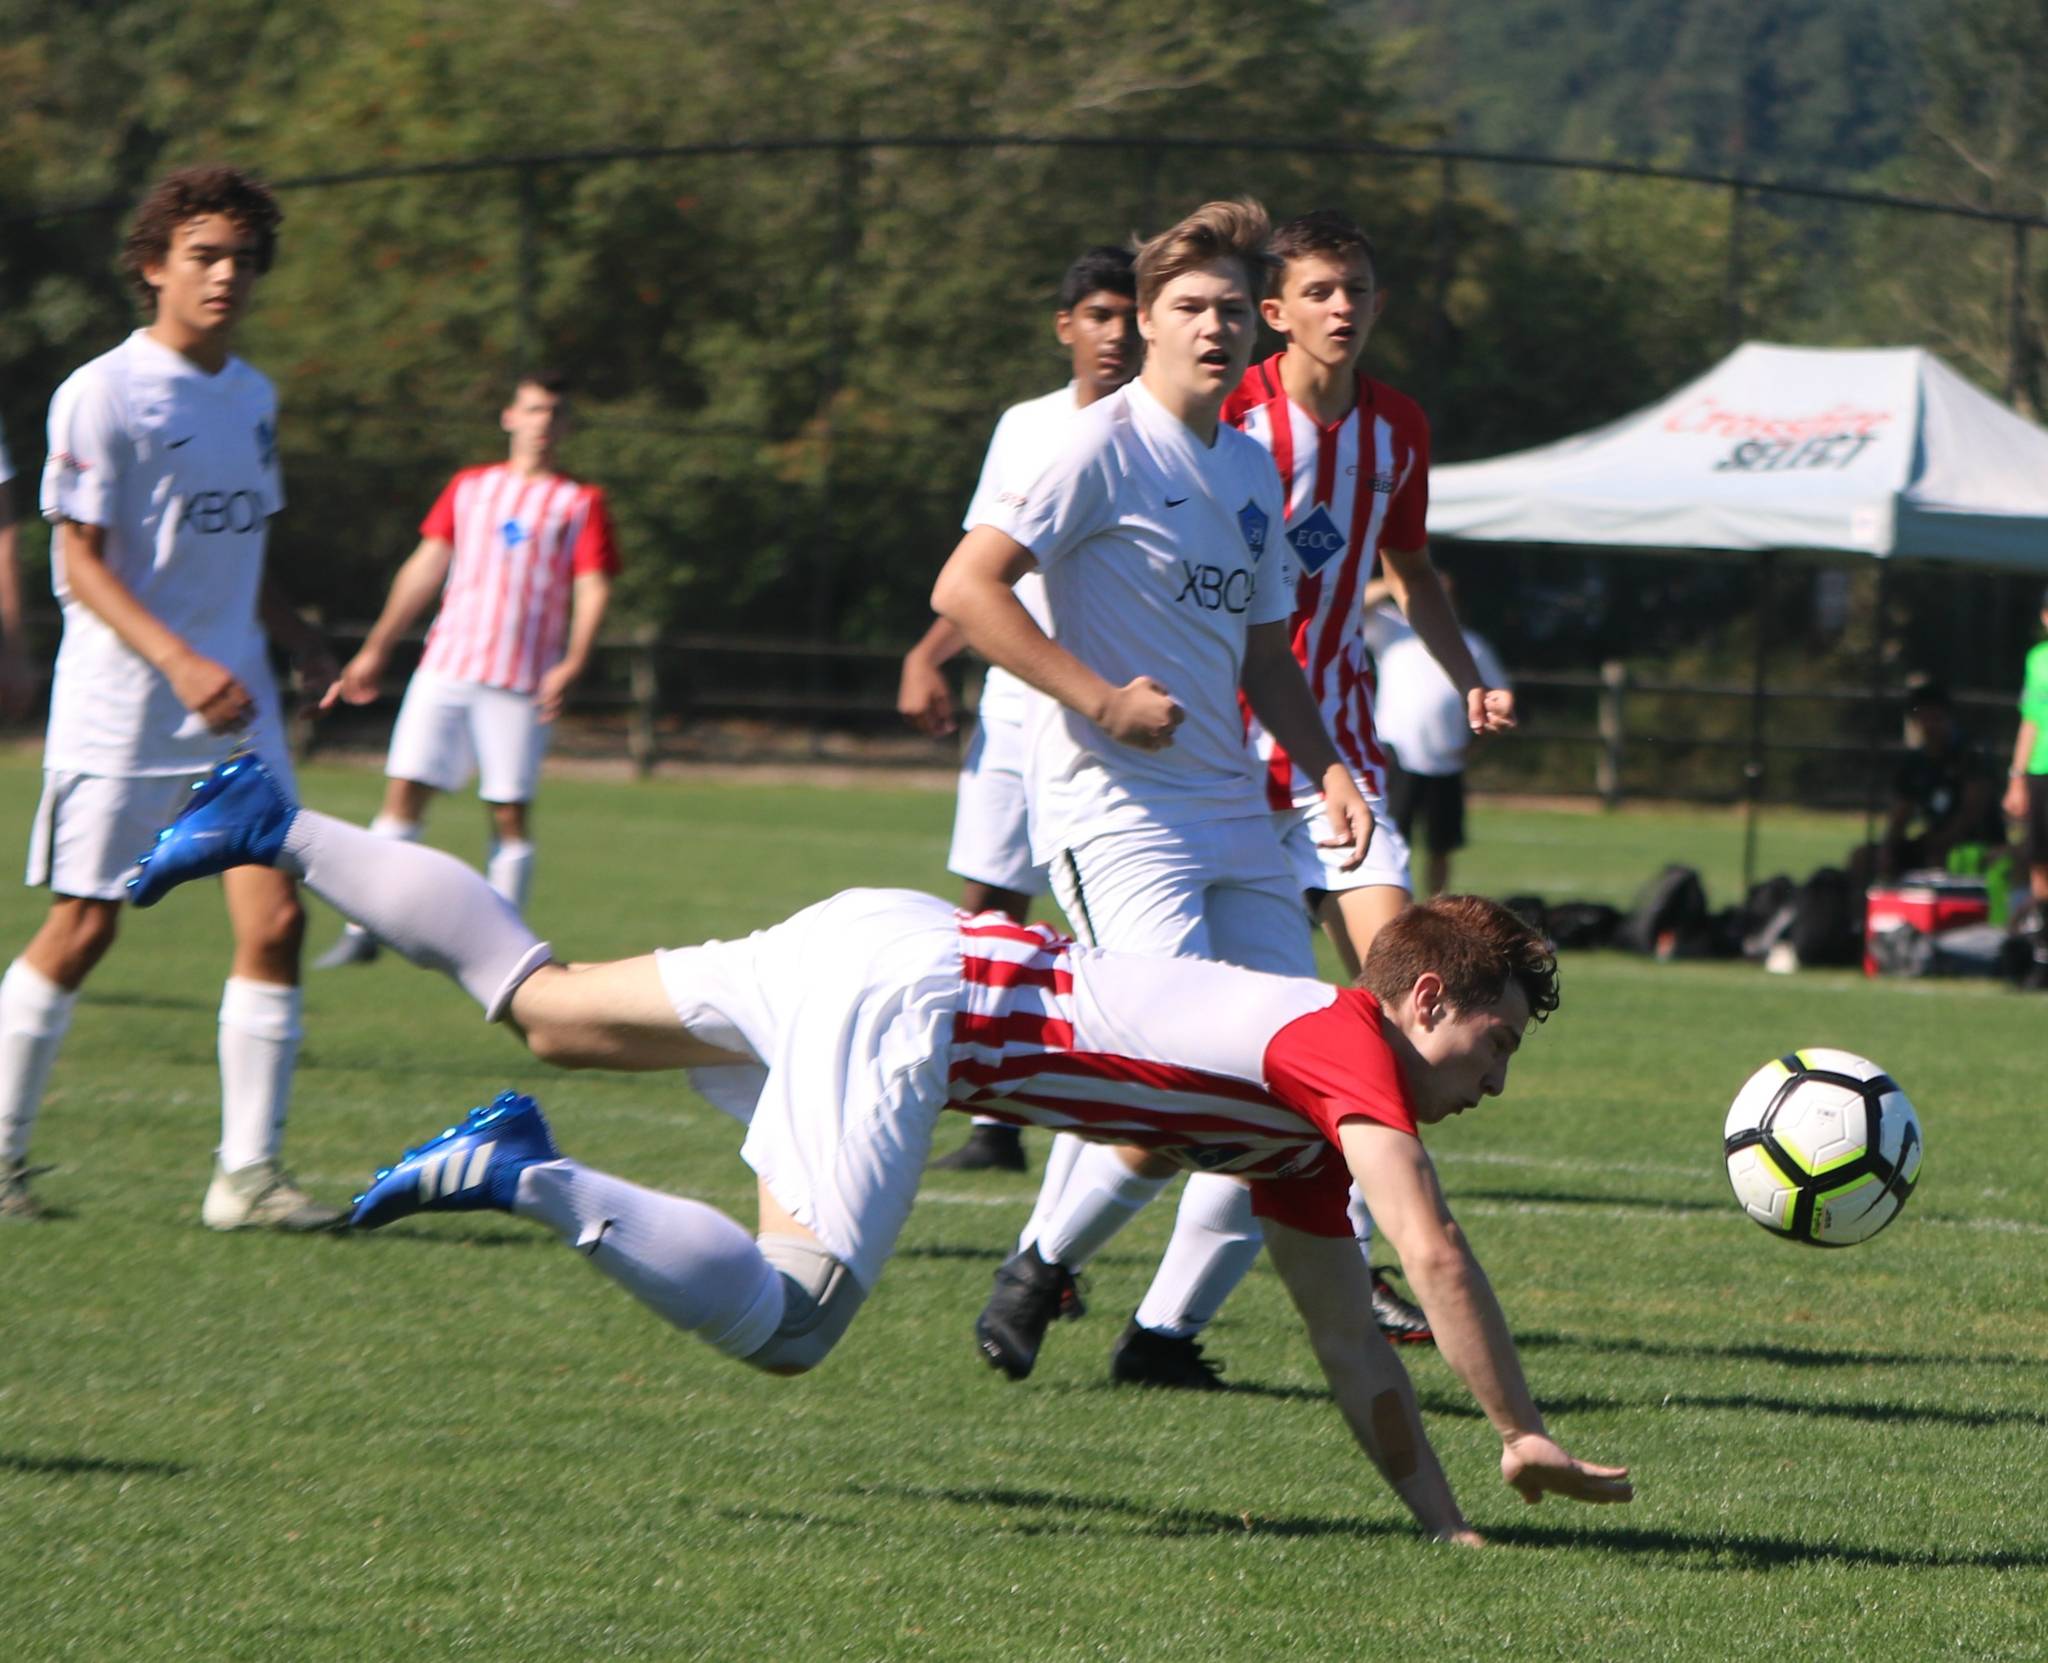 Crossfire Select took on ISC Gunners FC in a U19 boys soccer match on July 26. Andy Nystrom/ staff photo